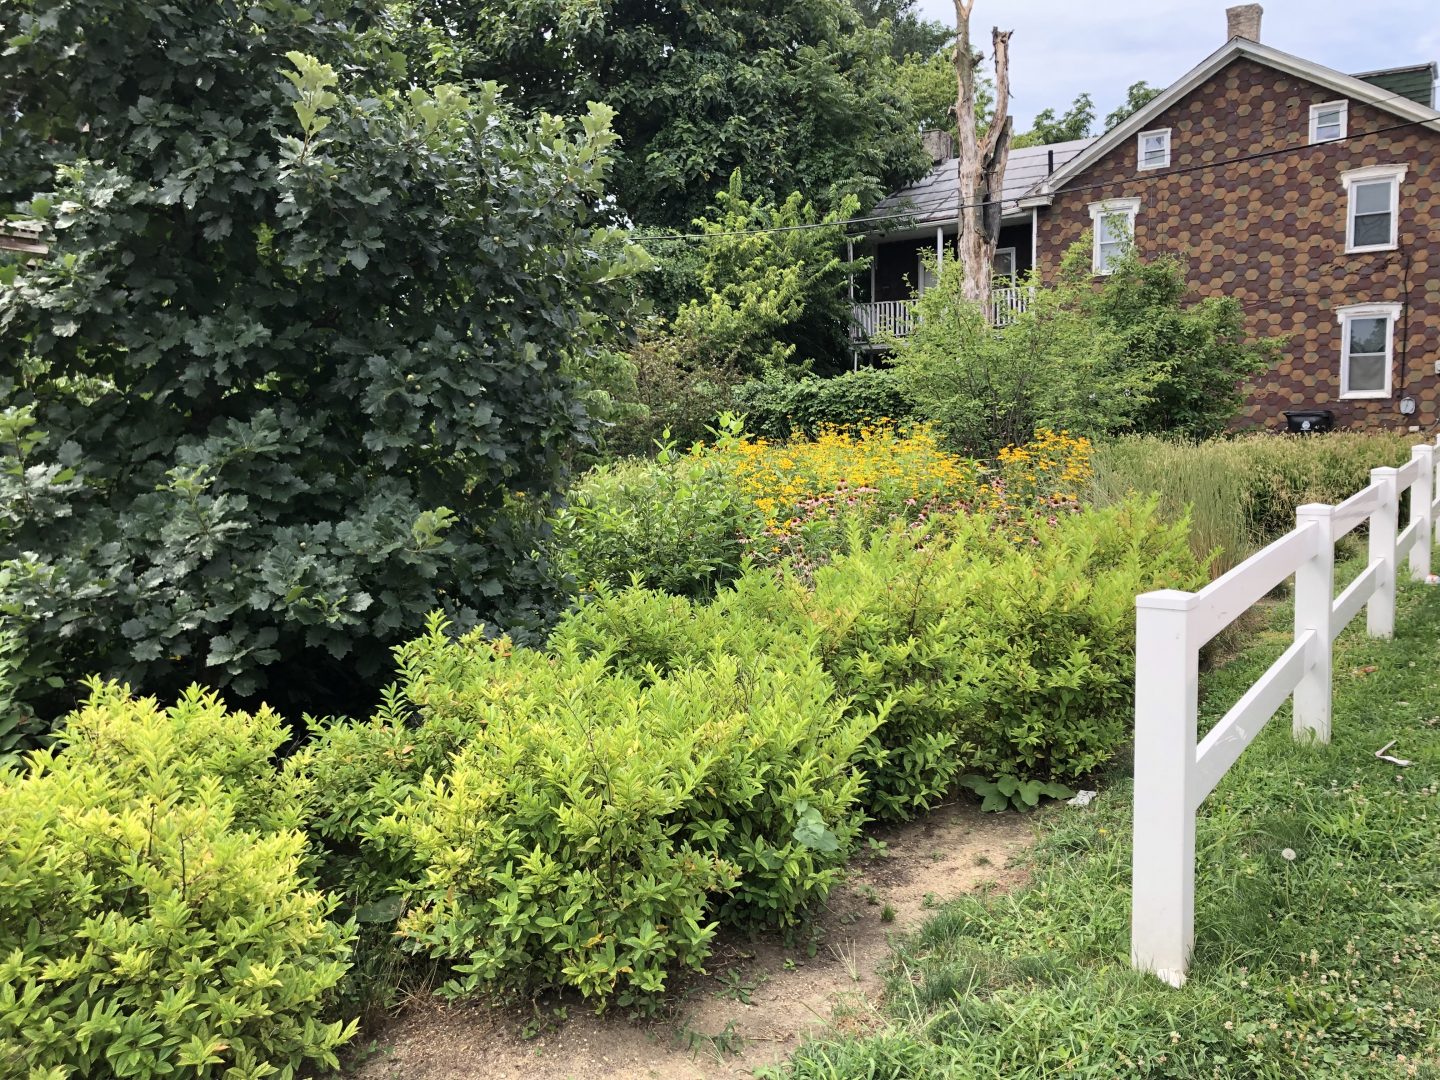 Coneflowers and trees grow in the rain garden on the corner of Bailey and North 13th streets in Summit Terrace. “These were little babies when we were doing this,” said Rafiyqa Muhammad, who helped create the garden. “Everything has grown.”